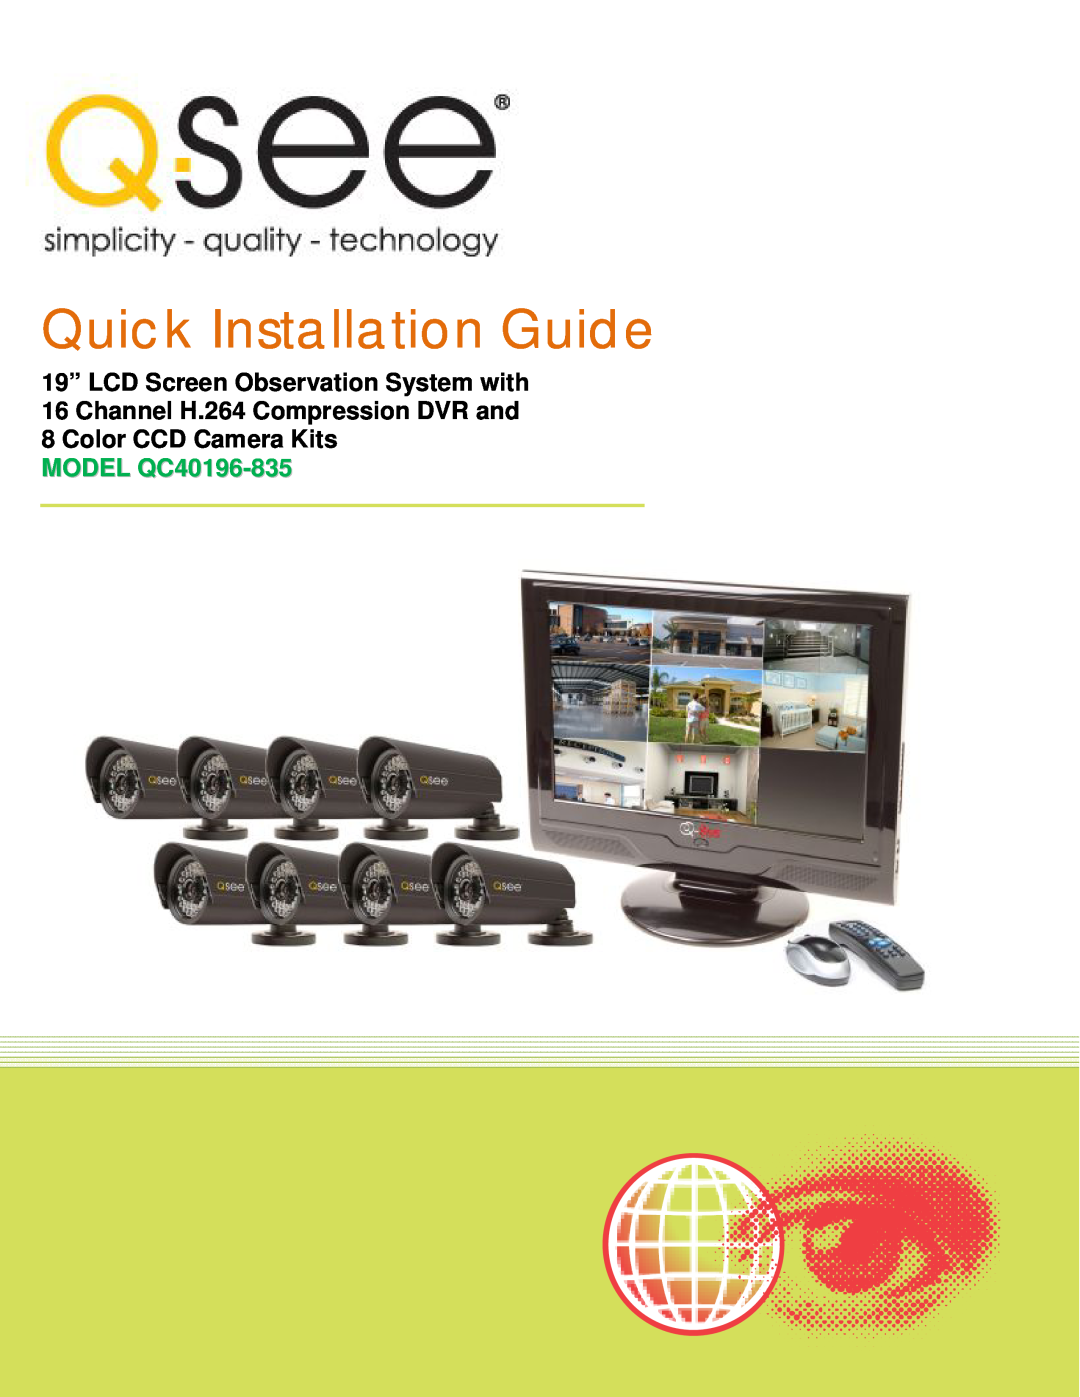 Q-See manual Quick Installation Guide, MODEL QC40196-835 